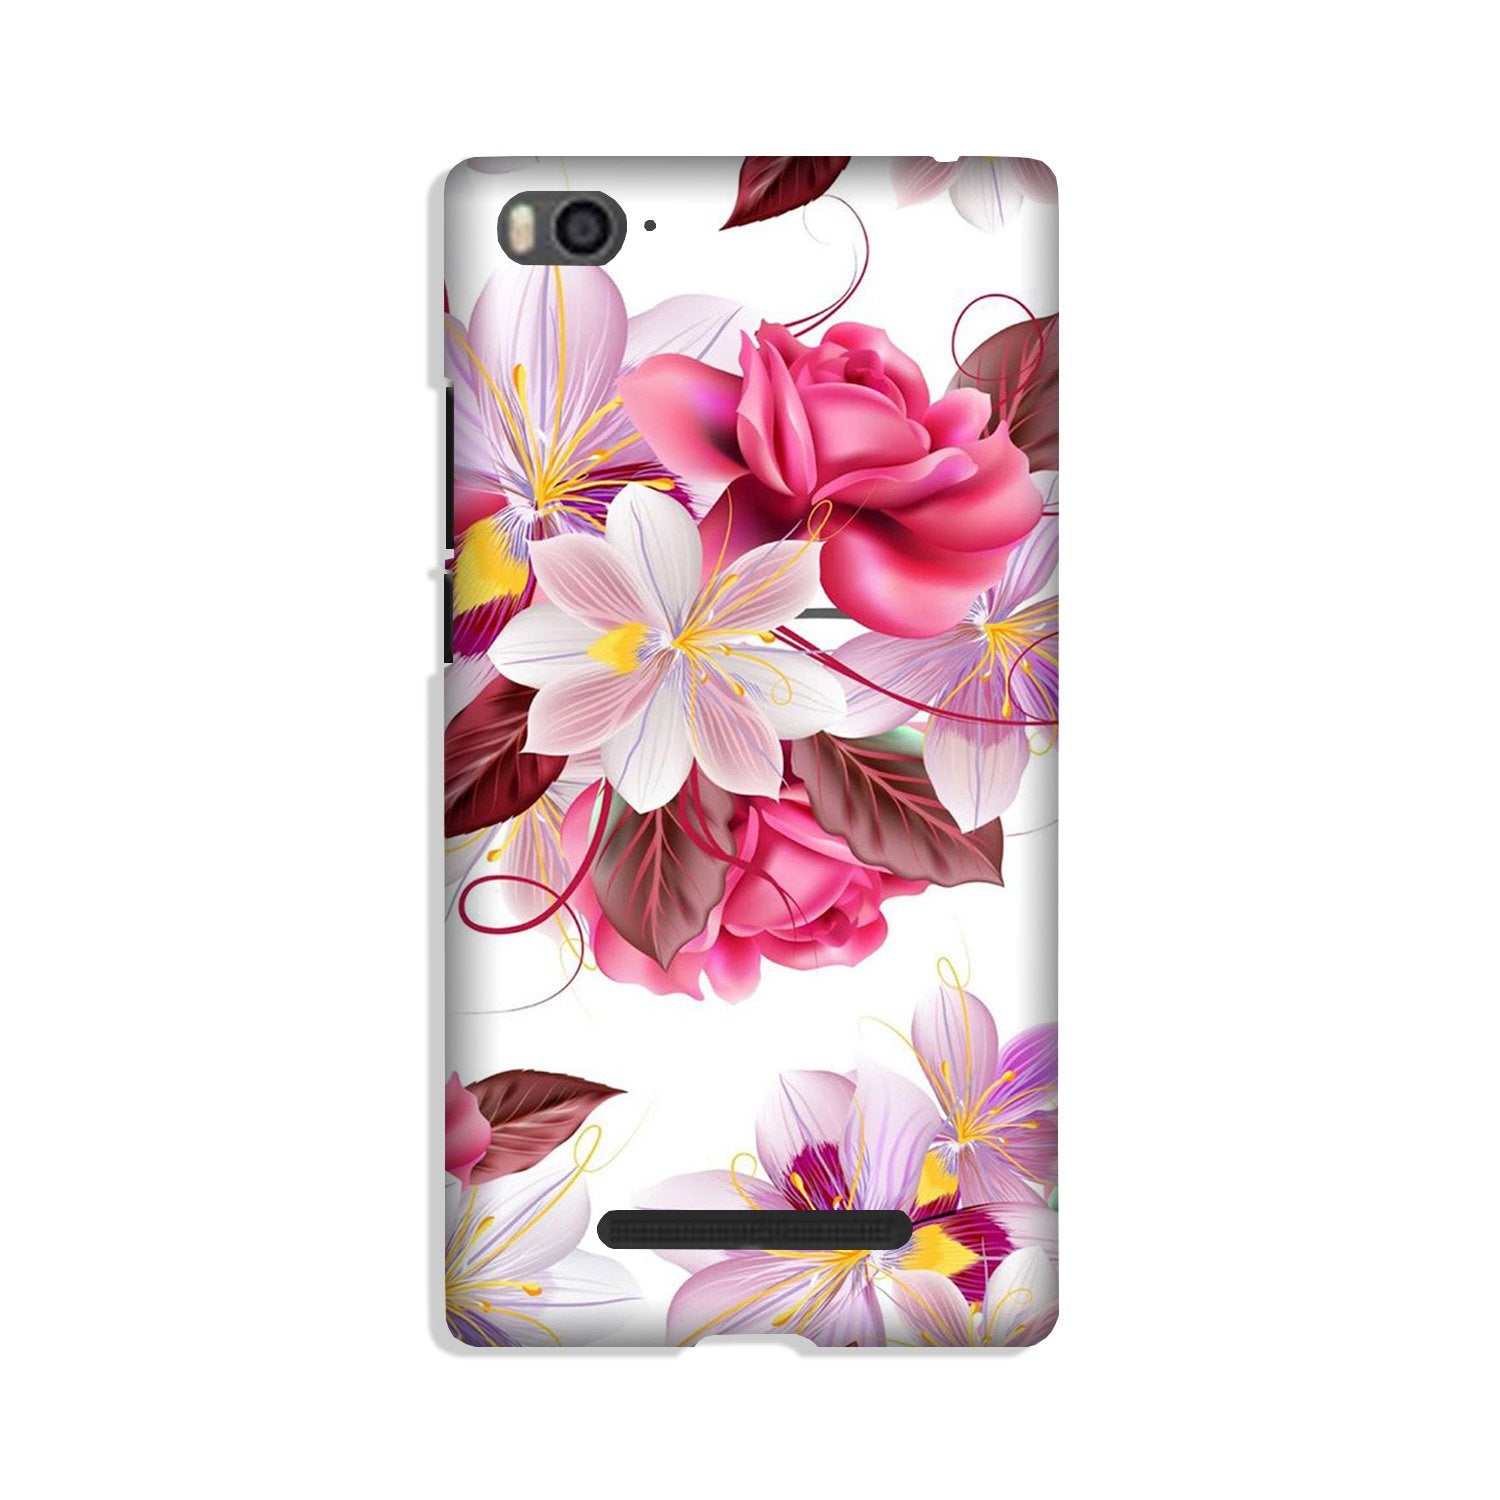 Beautiful flowers Case for Redmi 4A